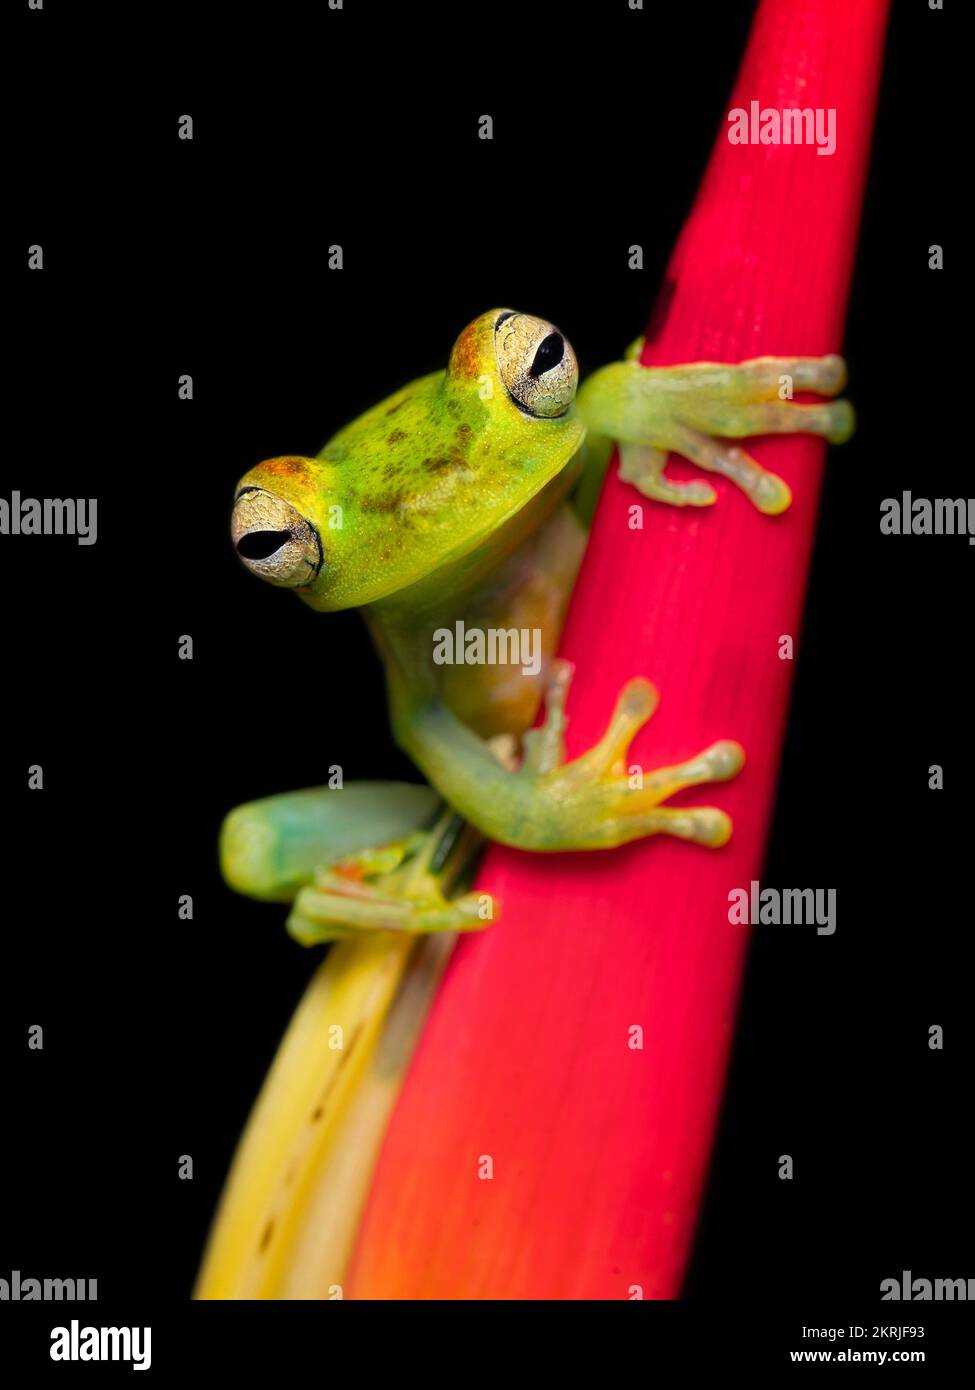 Canal Zone tree frog Stock Photo